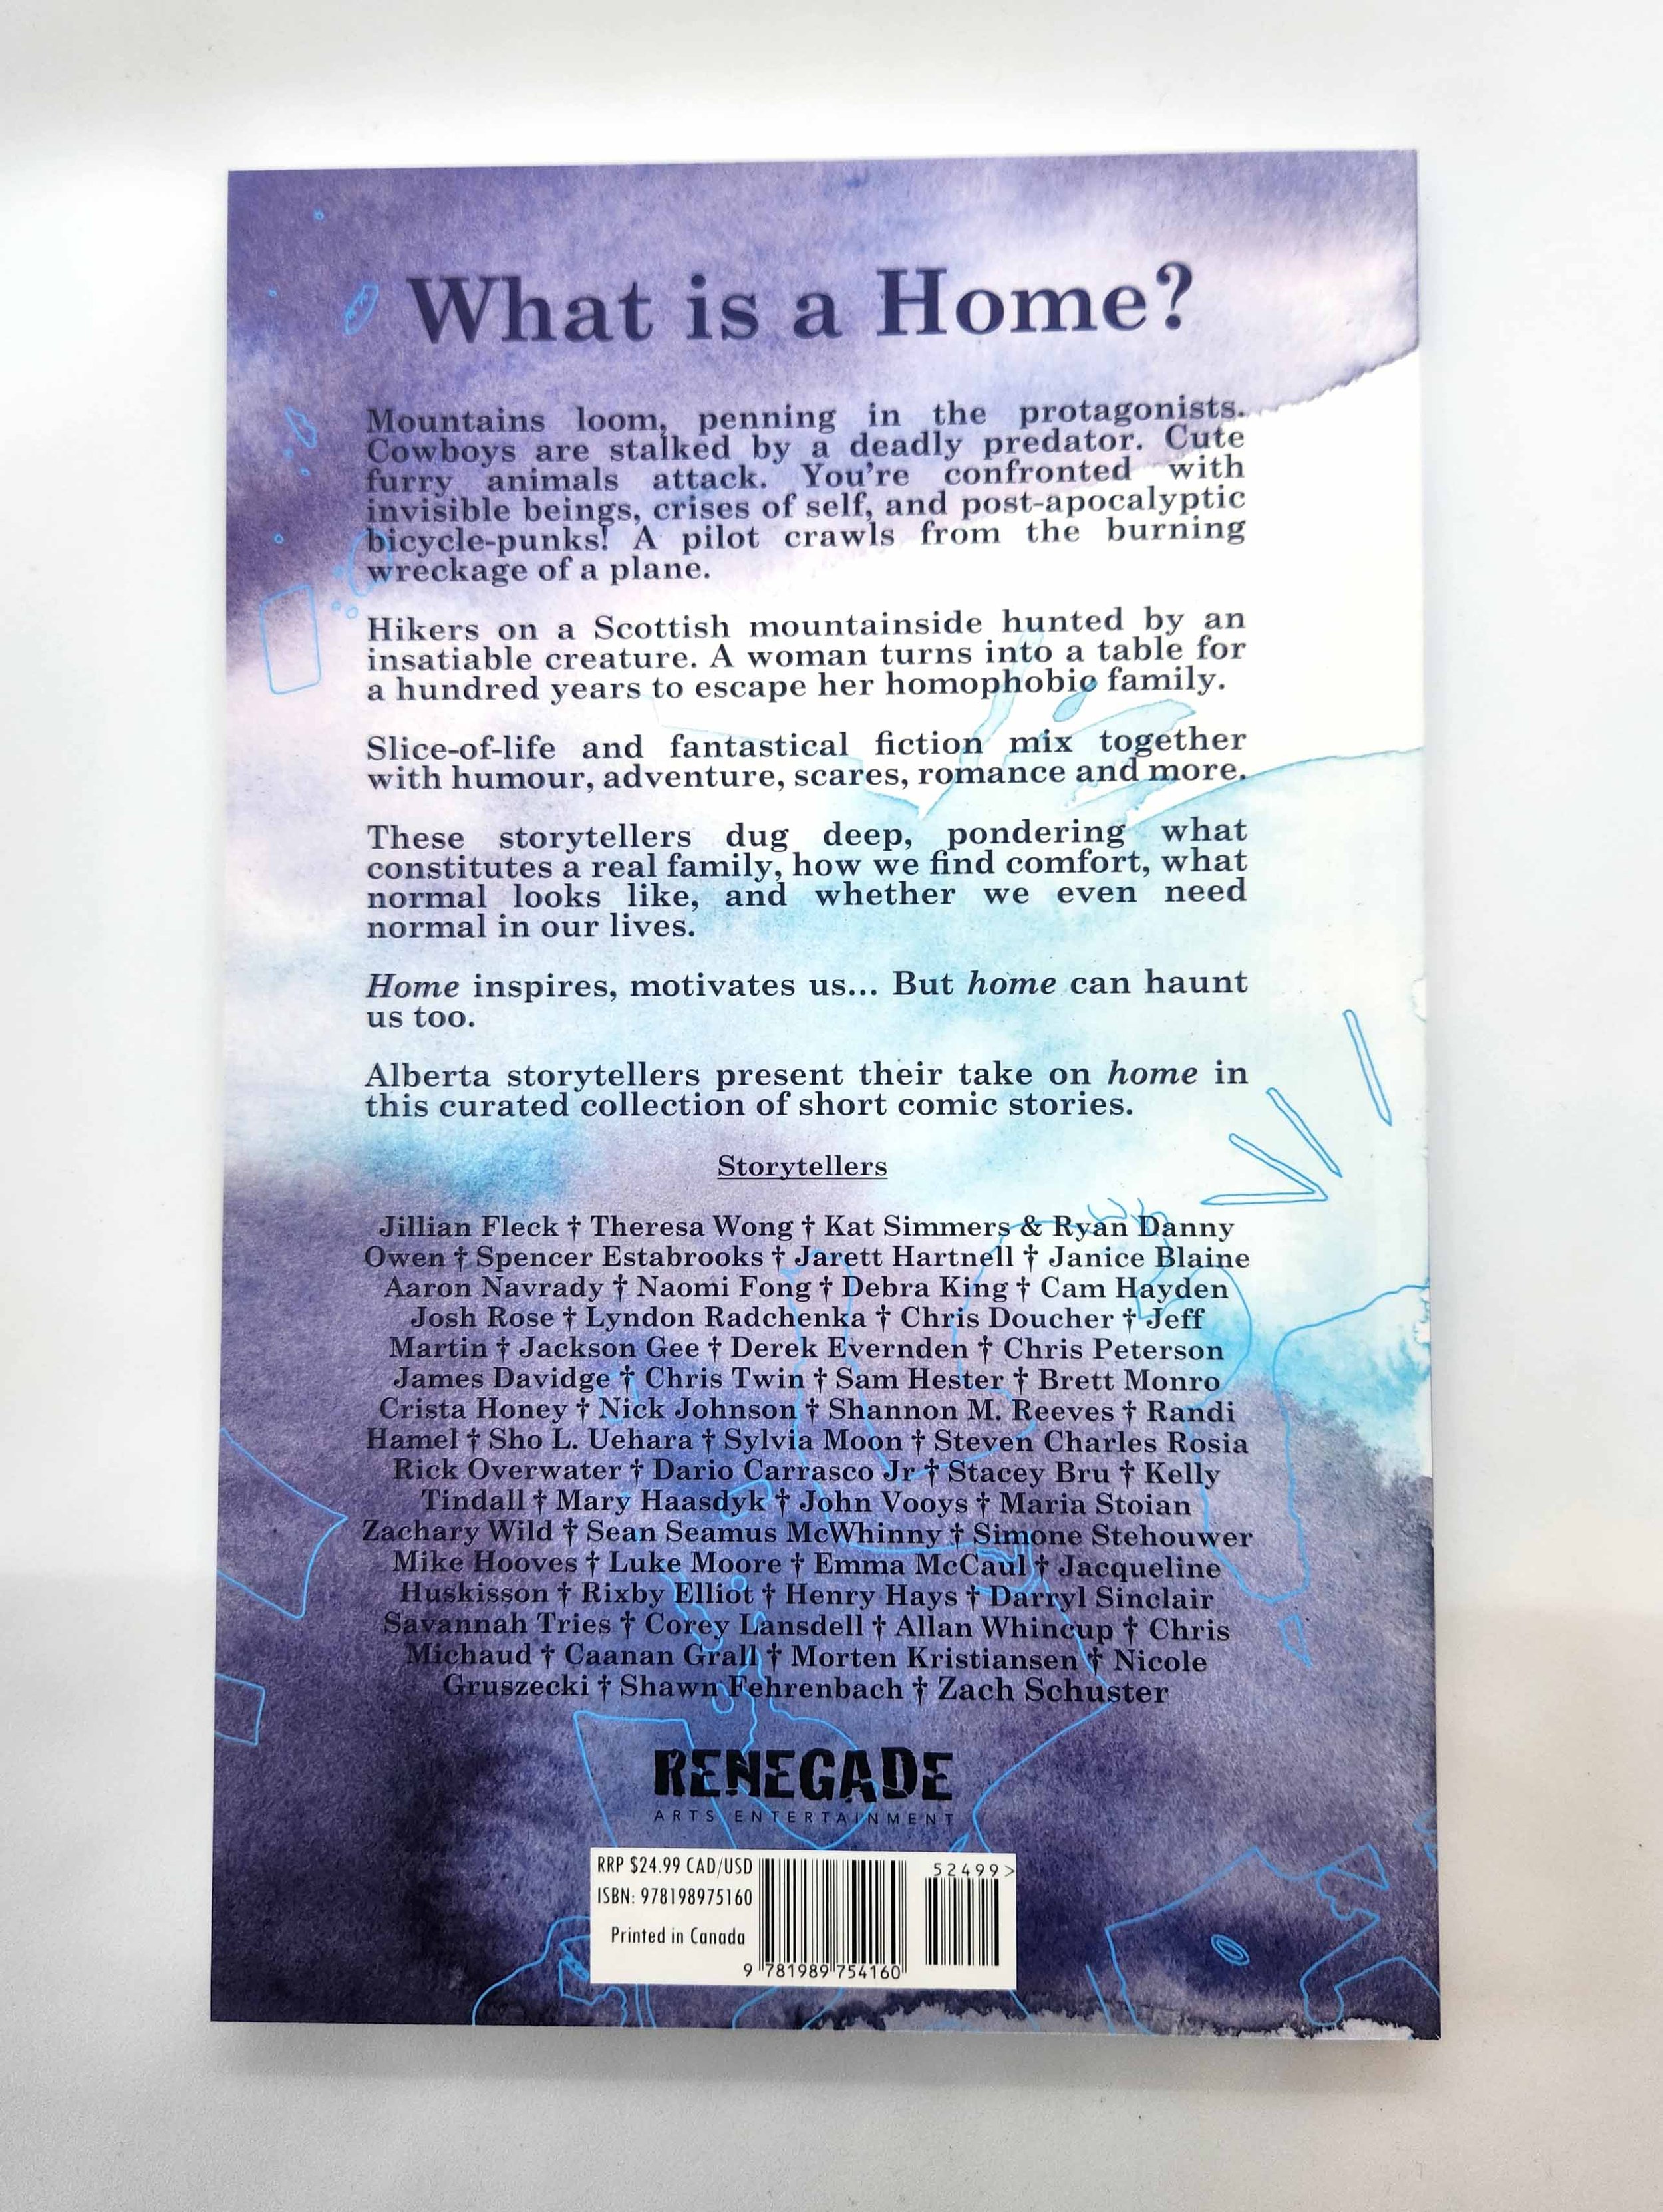 The Back Cover